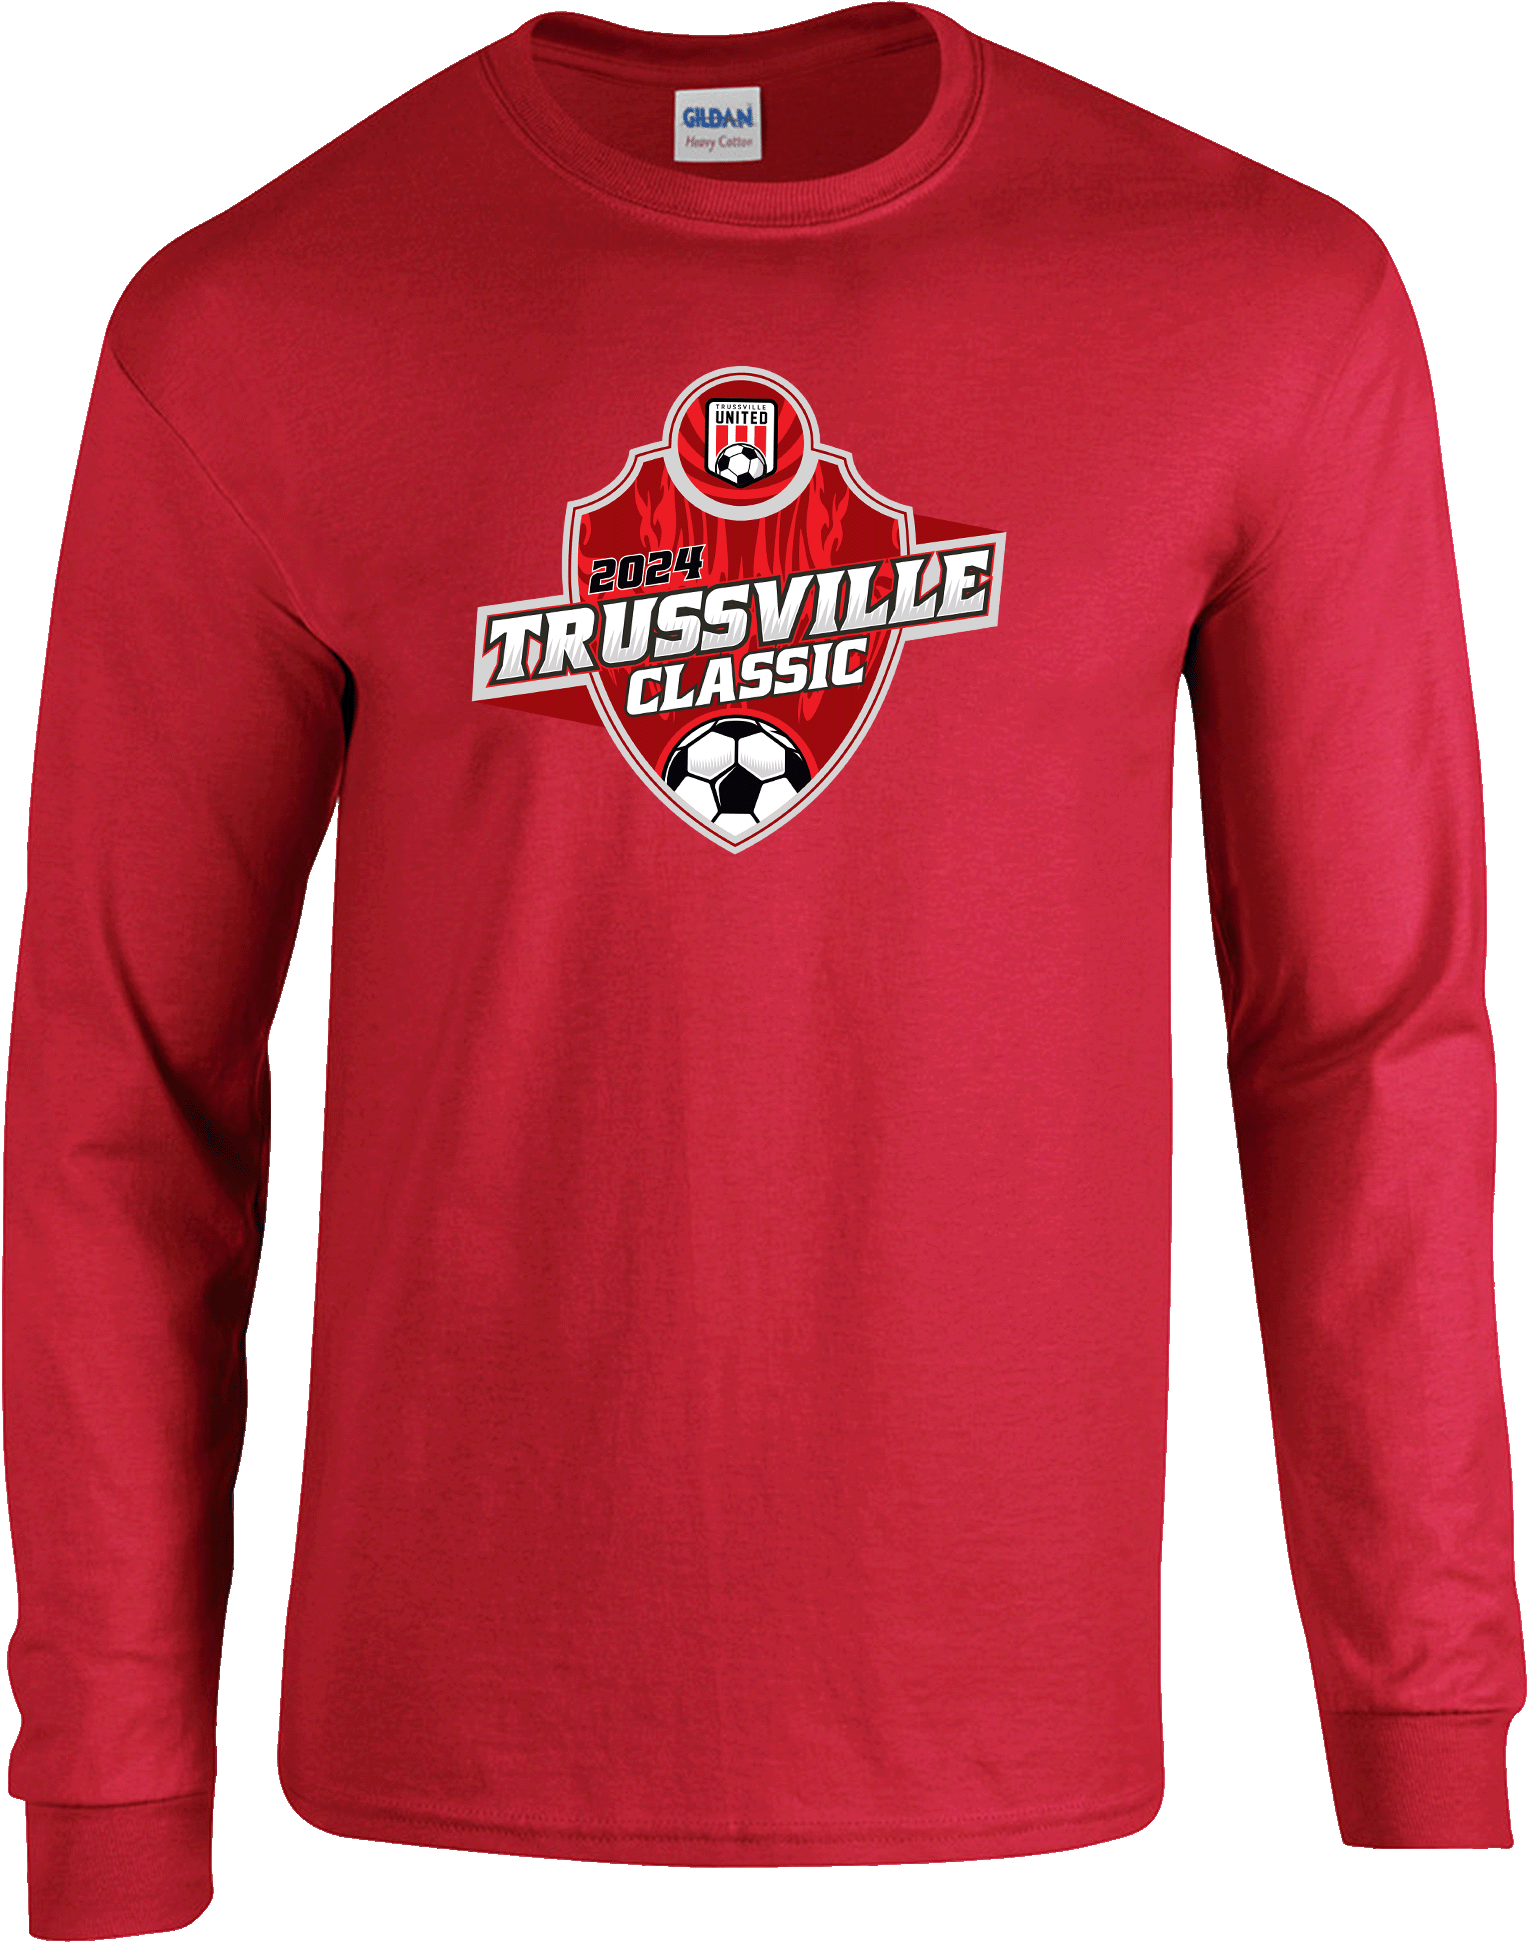 Long Sleeves - 2024 Trussville Classic